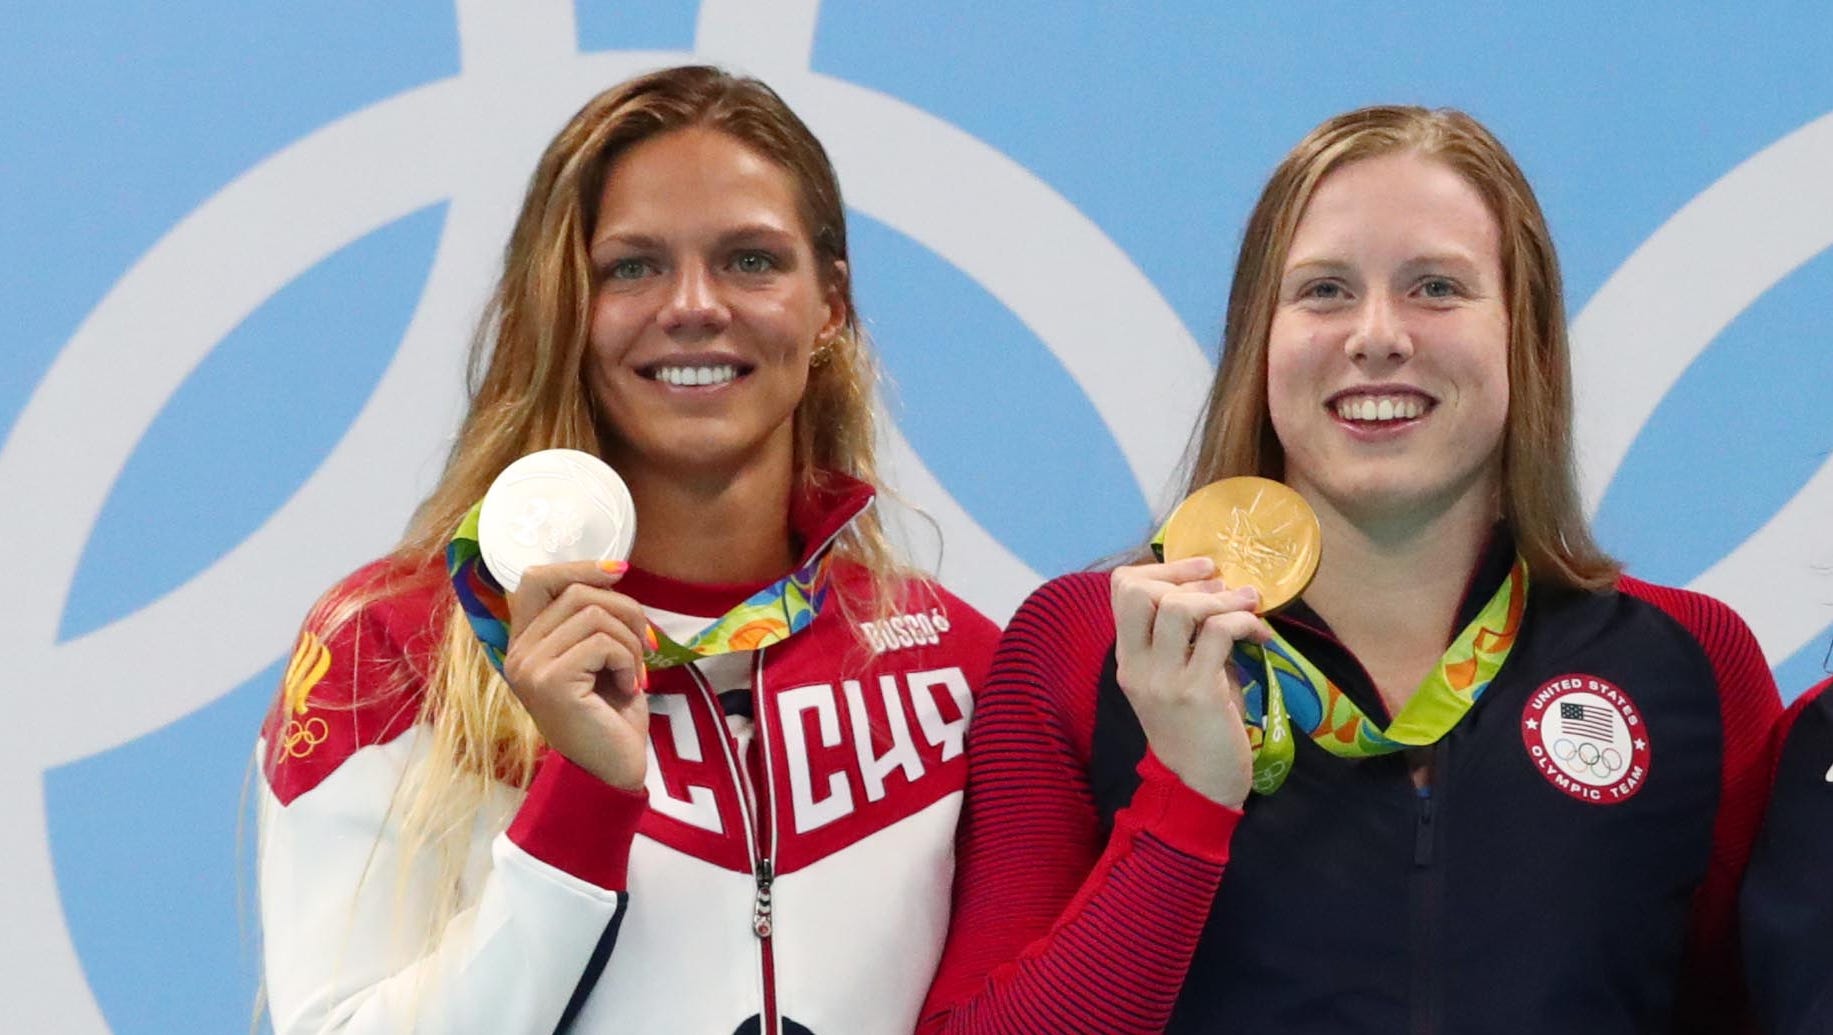 Yulia Efimova Blasts Lilly King For Turning Olympics Into A War With